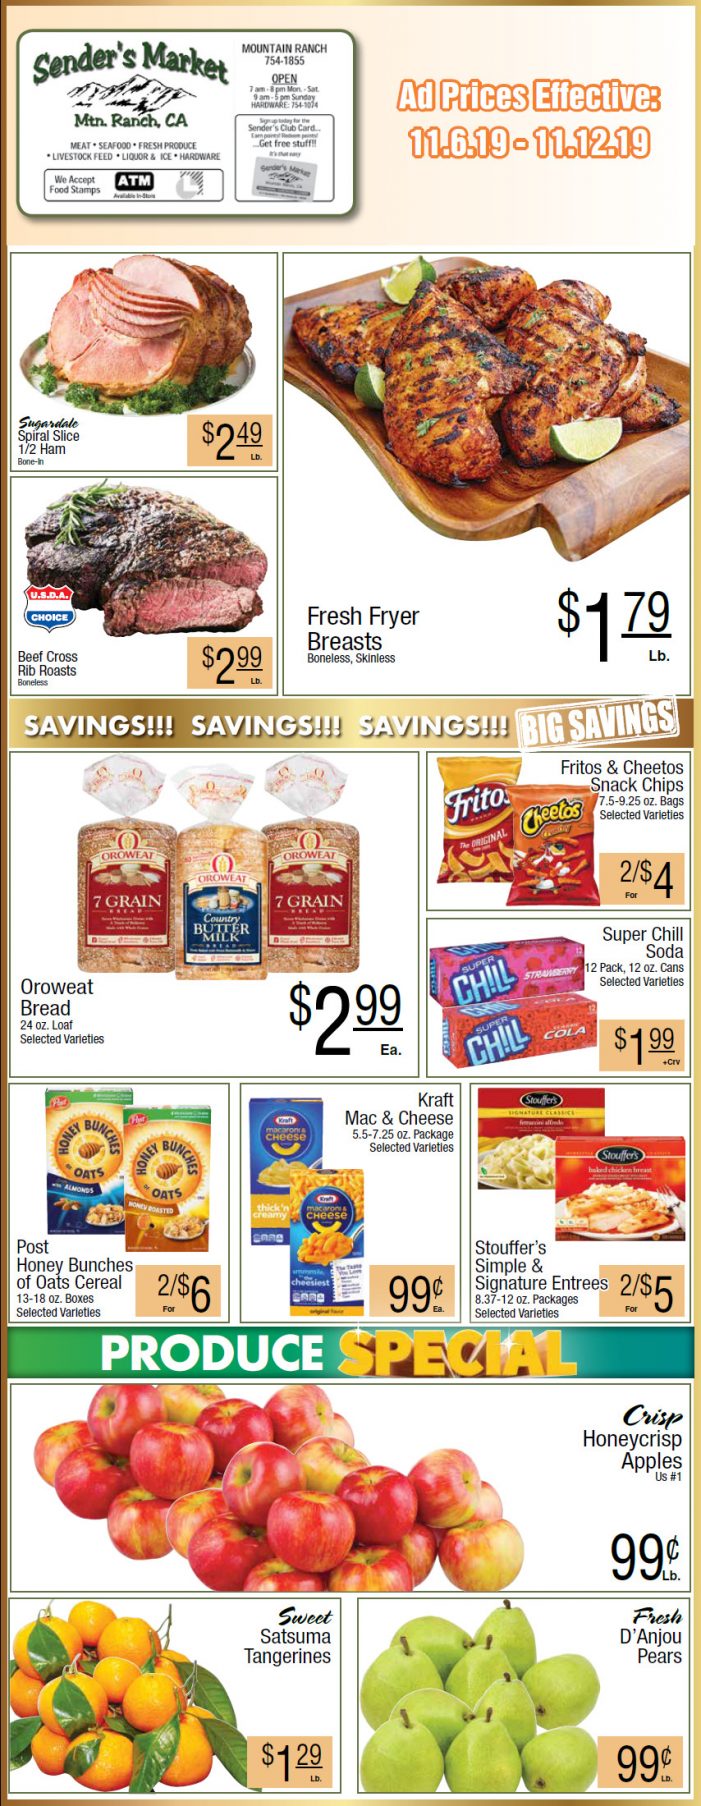 Sender’s Market Weekly Ad & Grocery Specials Through November 12th